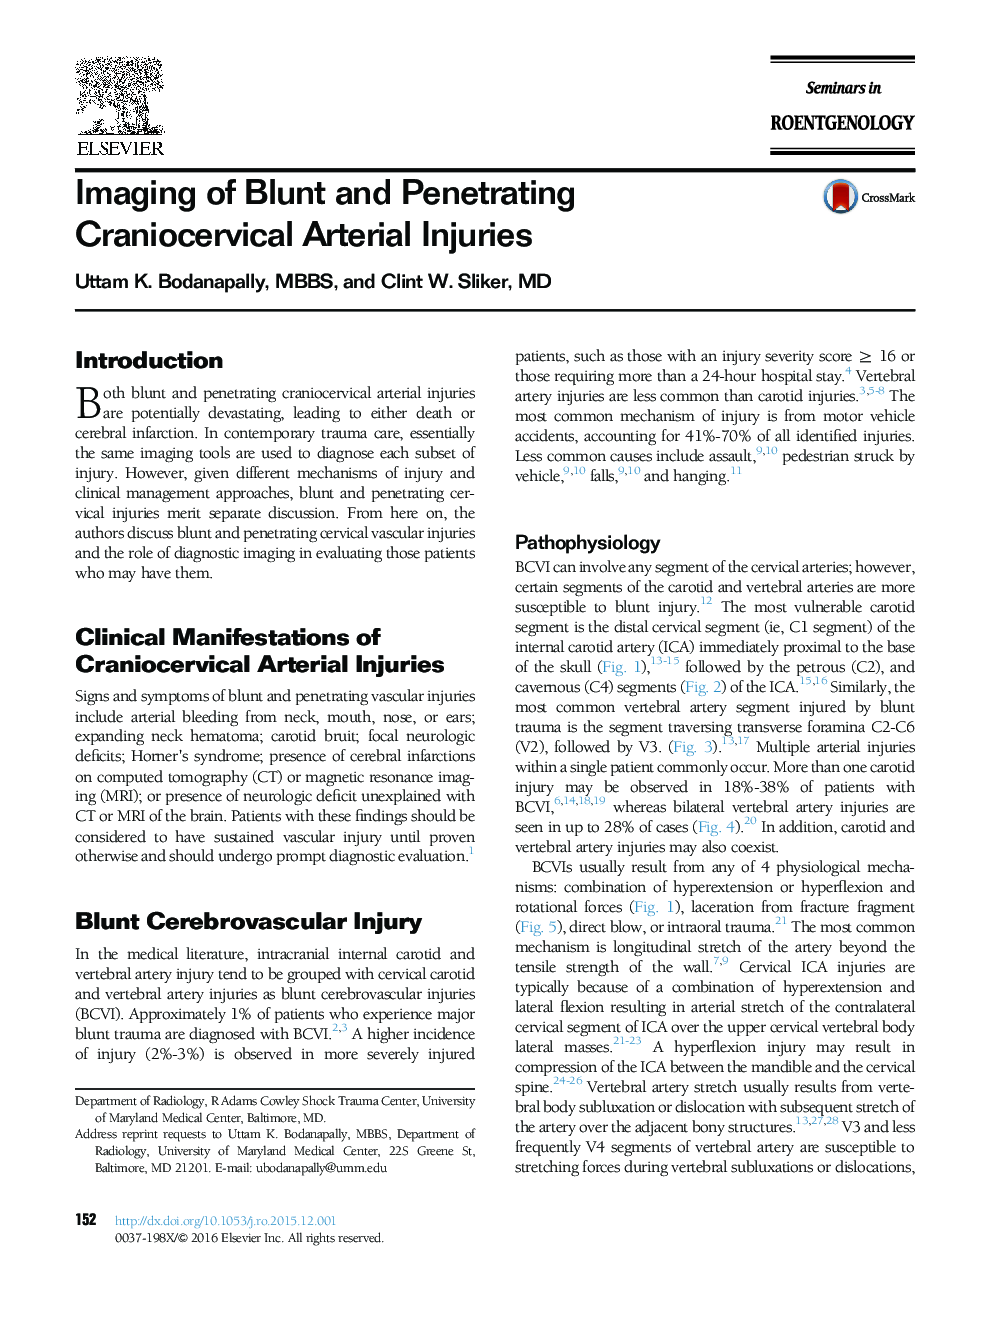 Imaging of Blunt and Penetrating Craniocervical Arterial Injuries